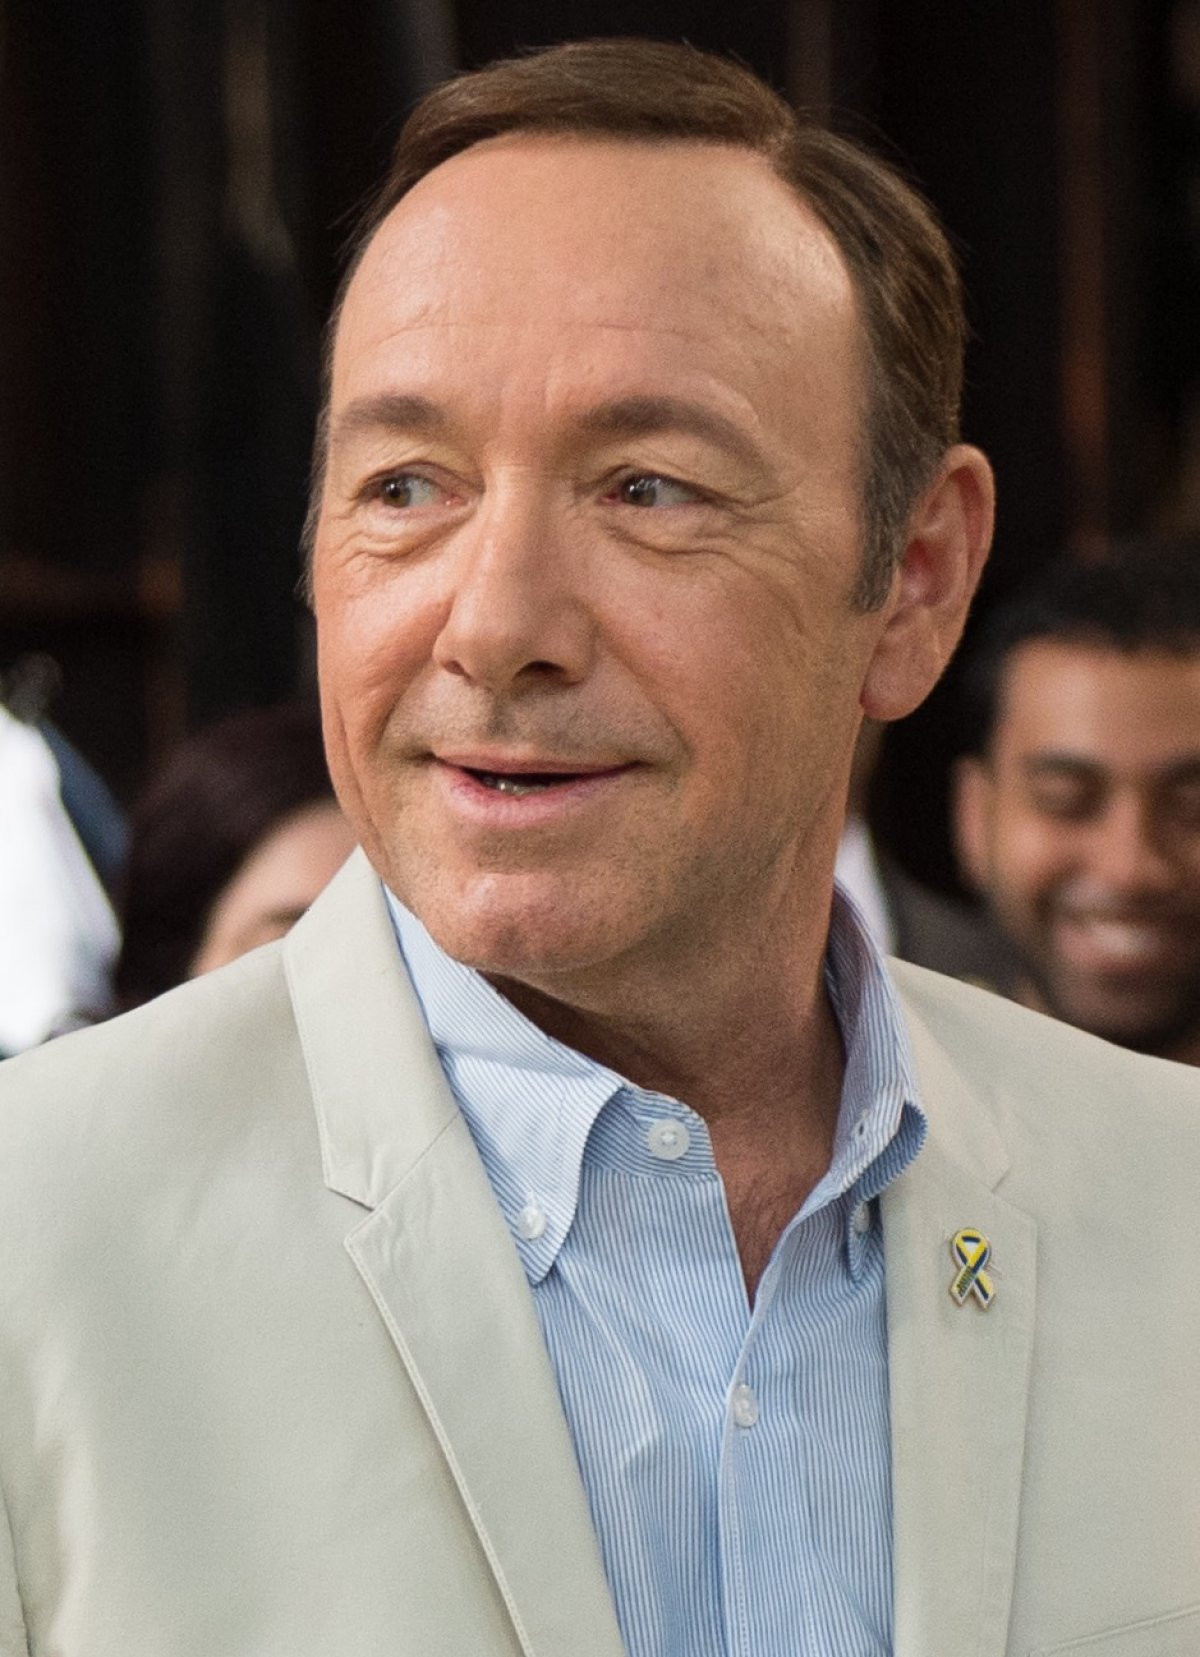 Uncovering The Mystery Of Who Is Kevin Spacey: A Look At The Life And Career Of The Controversial Actor